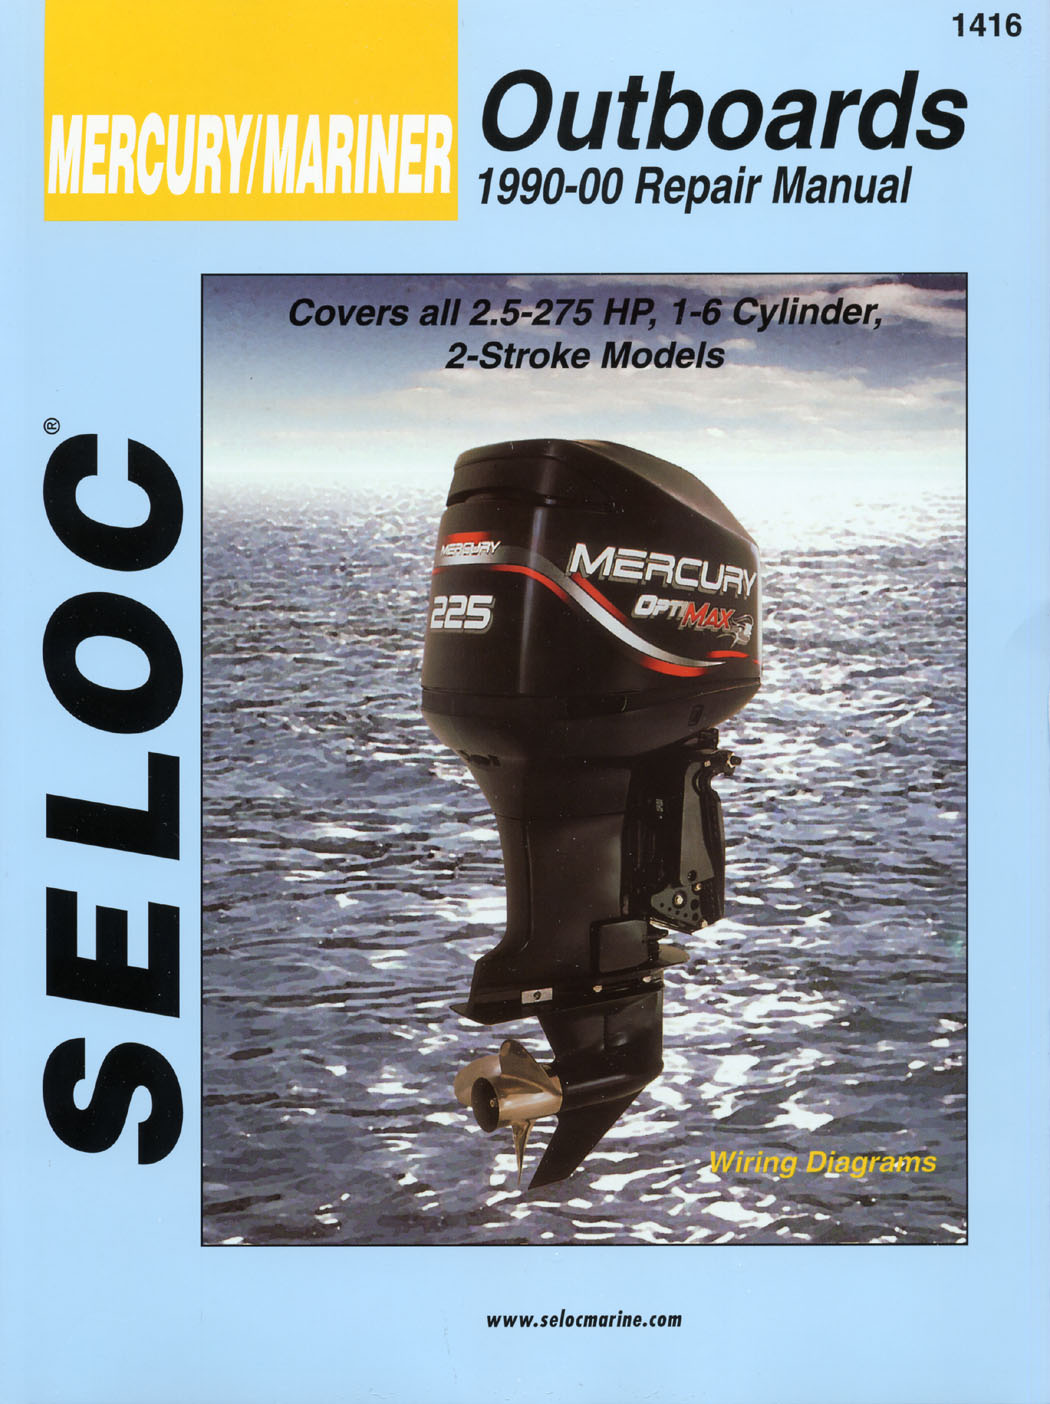 Mercury / Mariner Outboards 2.5 - 275HP, 1990-2000